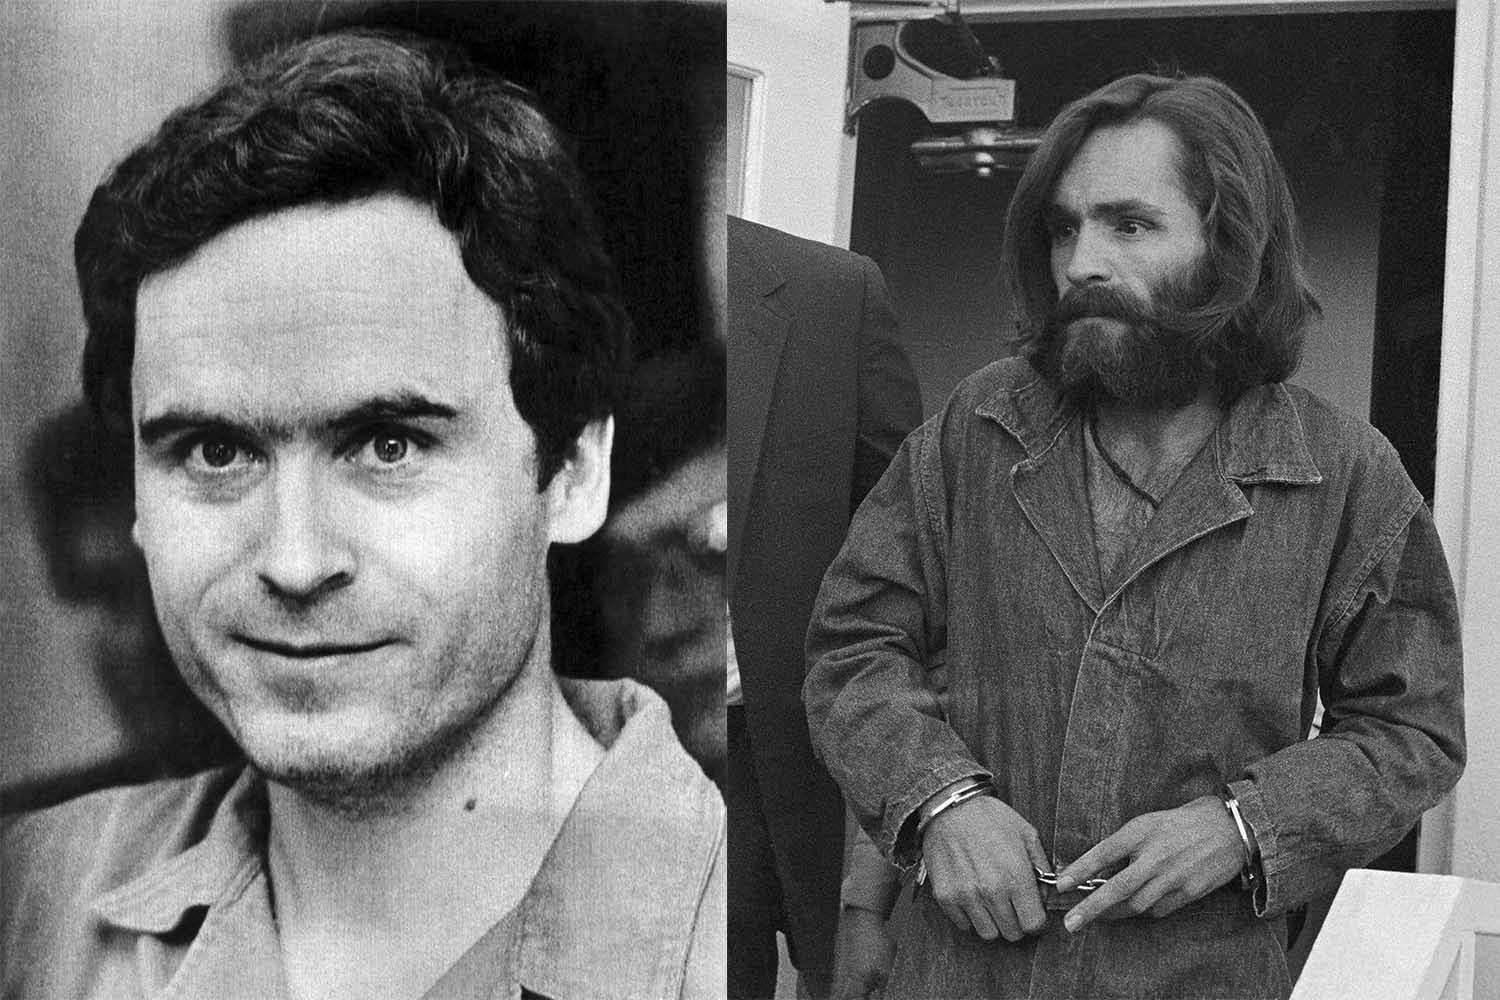 Charles Manson and Ted Bundy in a photo op.